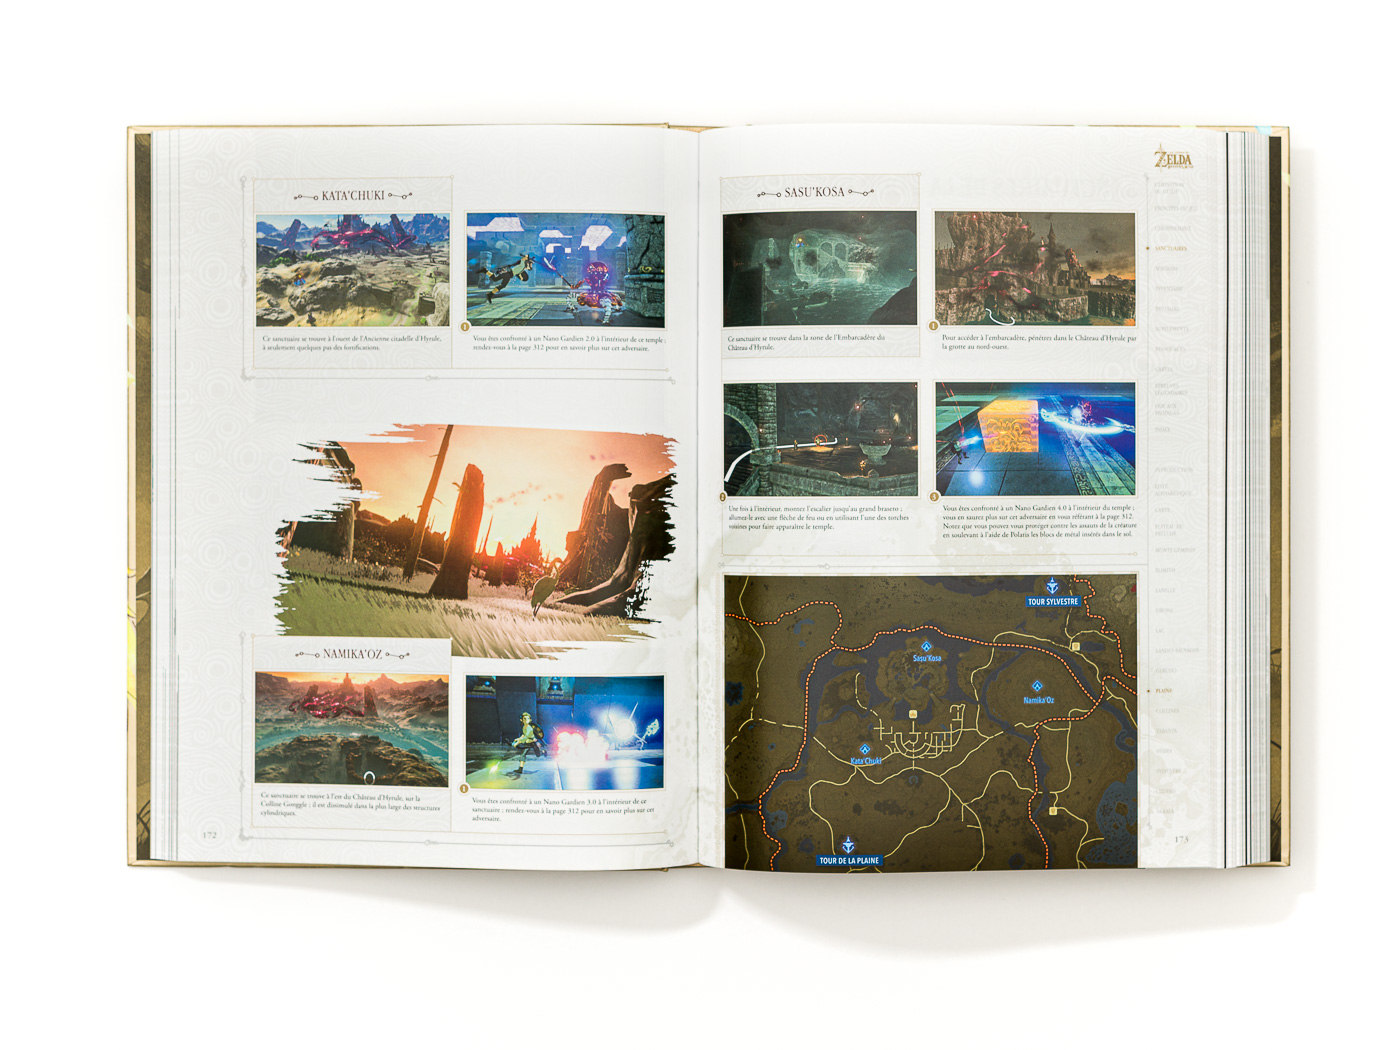 Guide - The Legend of Zelda: Breath of the Wild (Edition Augmentée)